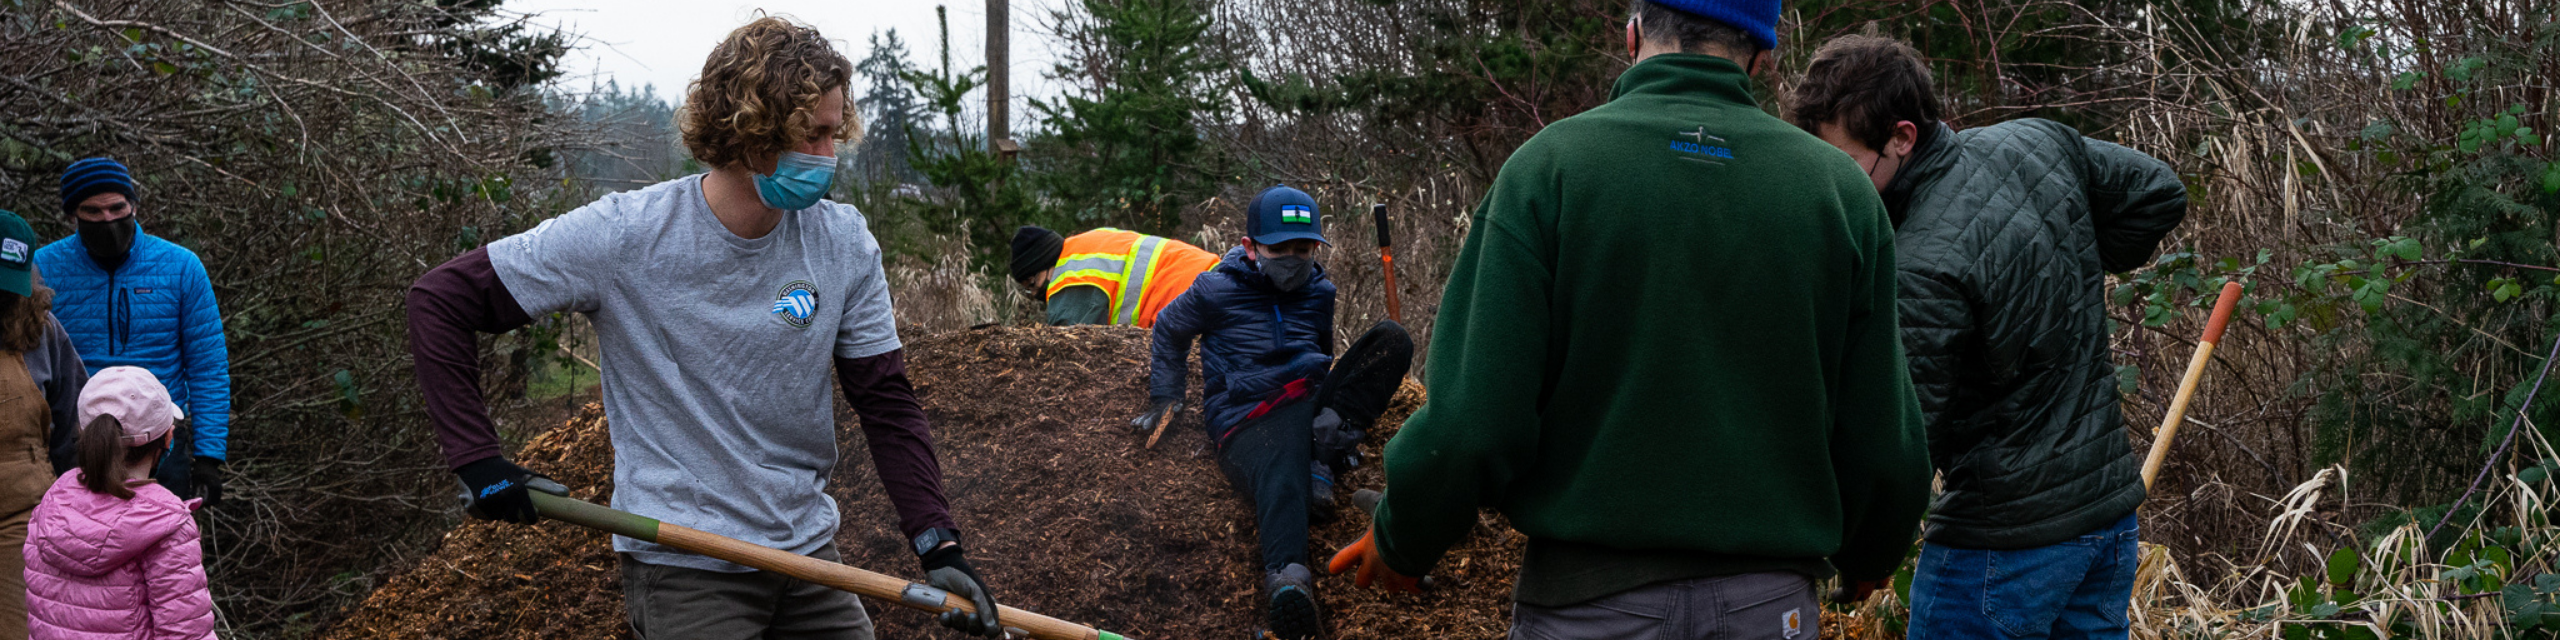 AmeriCorps member Sam with volunteers spreading mulch.